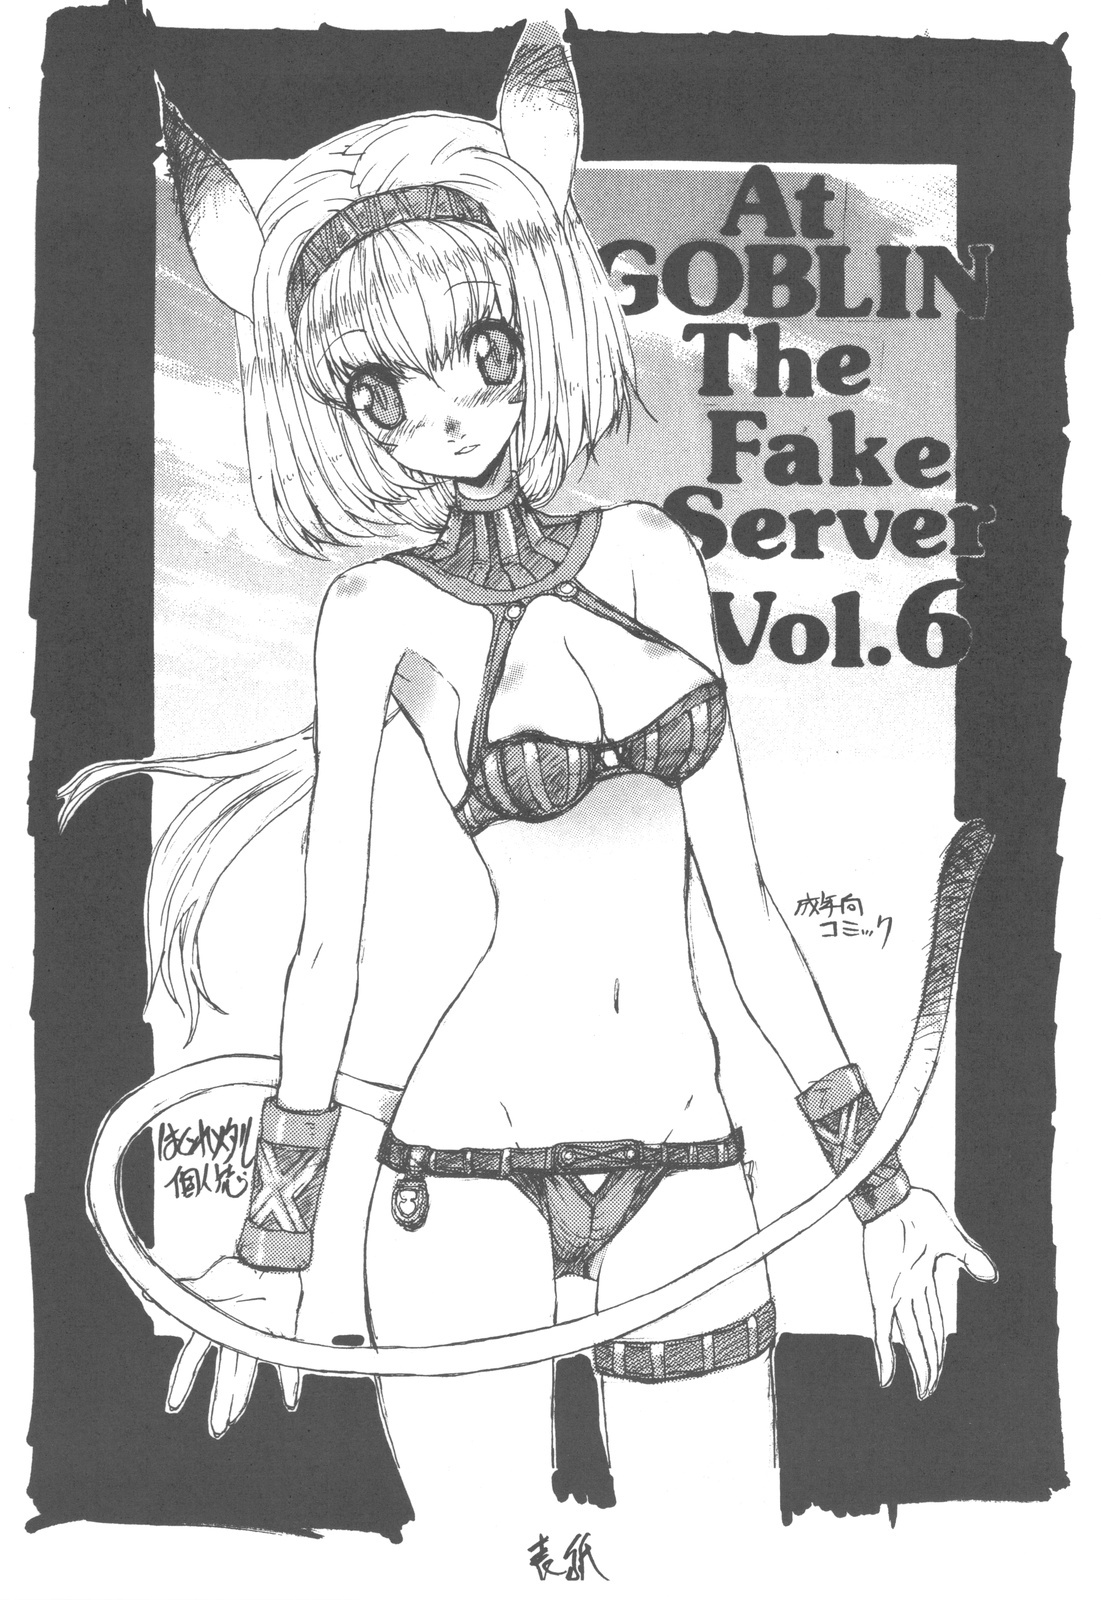 (COMIC1☆4) [ZINZIN] At GOBLIN The FakeServer Vol.6 (FF11) page 3 full